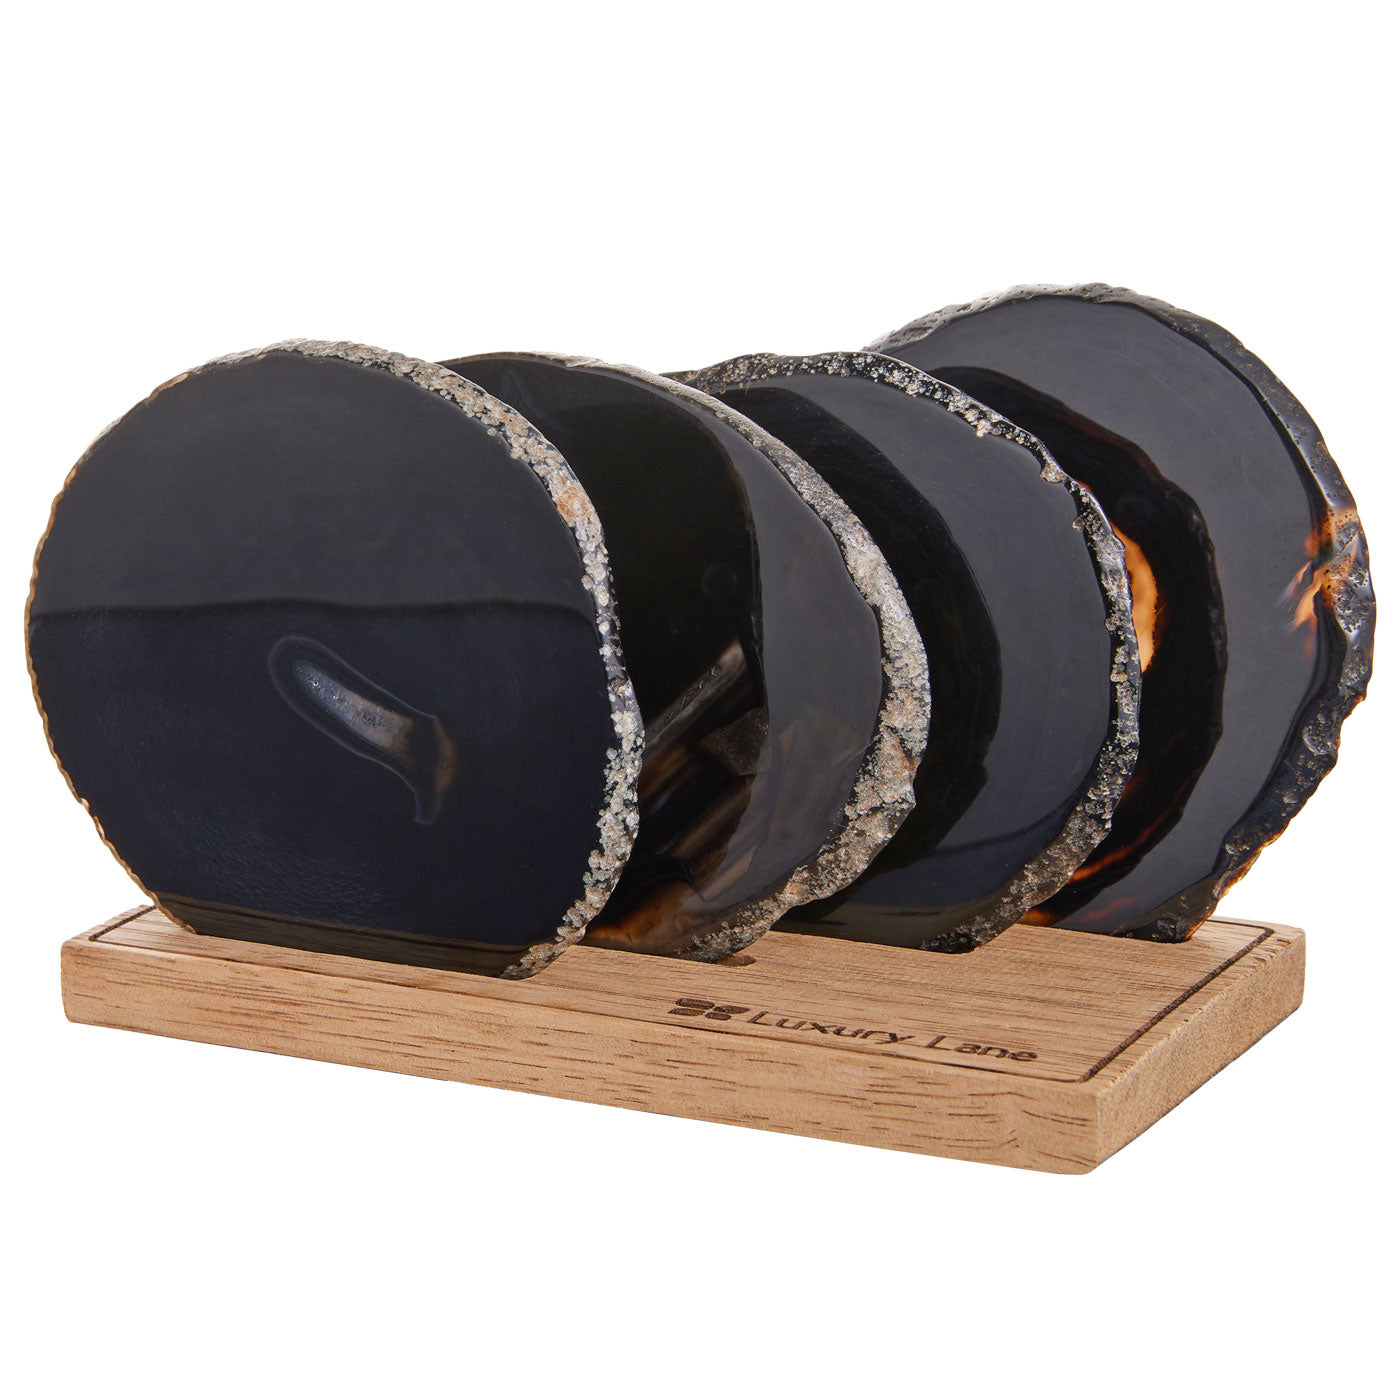 Set of 4 Natural Brazilian Agate Drink Coasters with Wood Holder - Black